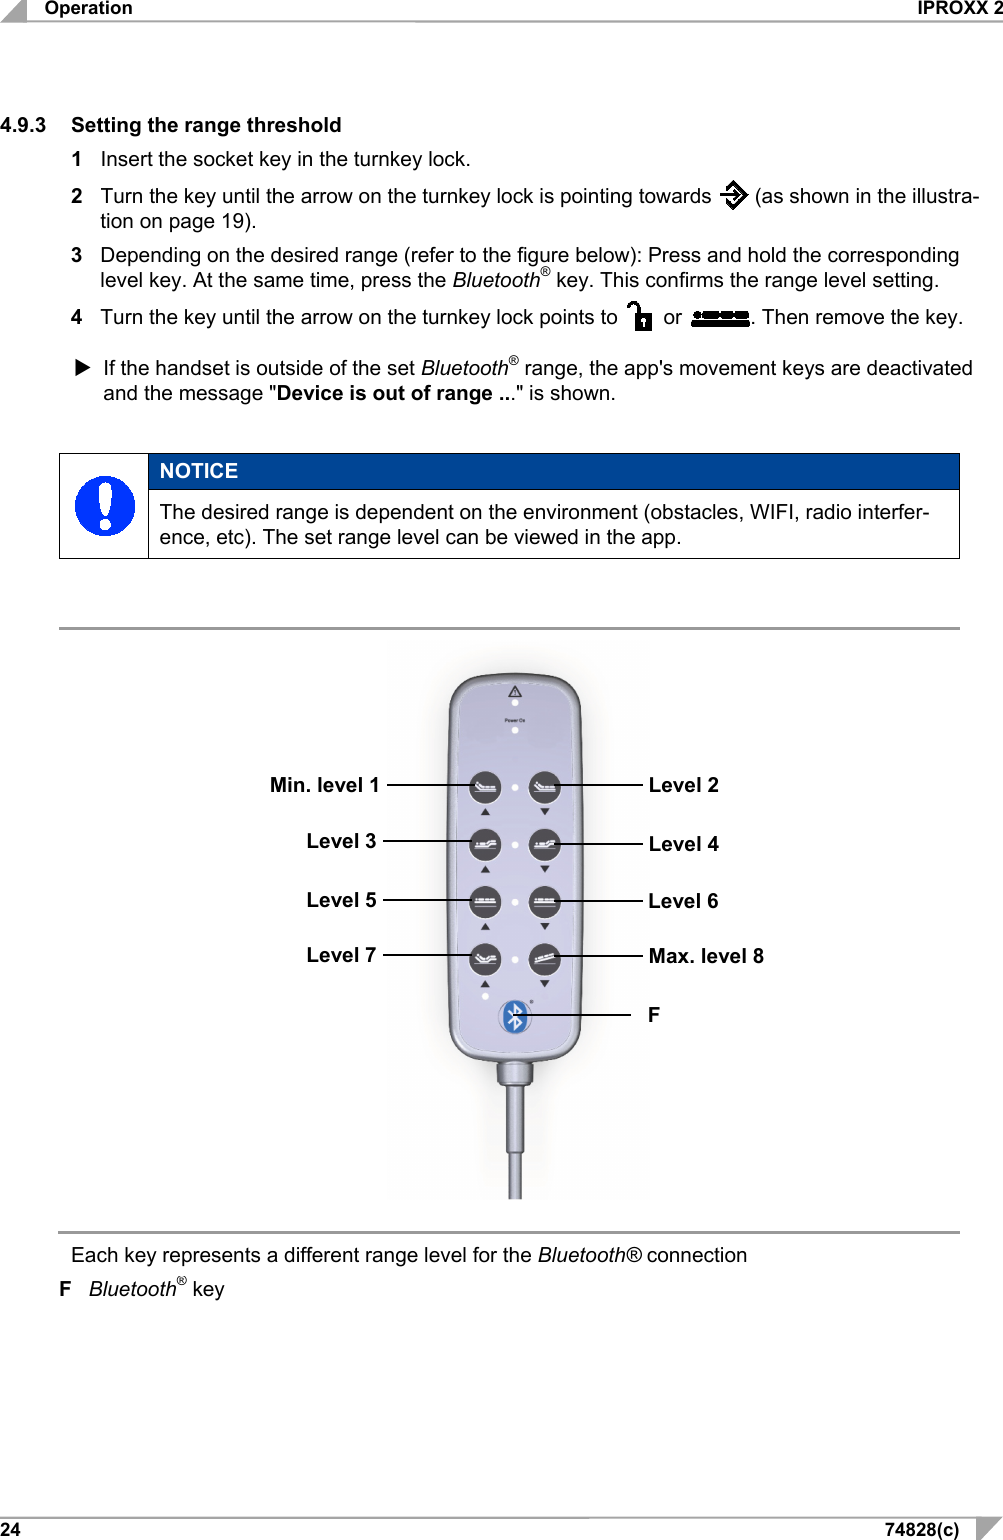 Operation IPROXX 2 24 74828(c) 4.9.3 Setting the range threshold 1  Insert the socket key in the turnkey lock. 2  Turn the key until the arrow on the turnkey lock is pointing towards   (as shown in the illustra-tion on page 19). 3  Depending on the desired range (refer to the figure below): Press and hold the corresponding level key. At the same time, press the Bluetooth® key. This confirms the range level setting. 4  Turn the key until the arrow on the turnkey lock points to    or  . Then remove the key.  If the handset is outside of the set Bluetooth® range, the app&apos;s movement keys are deactivated and the message &quot;Device is out of range ...&quot; is shown.   NOTICE The desired range is dependent on the environment (obstacles, WIFI, radio interfer-ence, etc). The set range level can be viewed in the app.                                               Each key represents a different range level for the Bluetooth® connection  F  Bluetooth® key    Level 7     F     Max. level 8   Level 5    Level 3    Min. level 1      Level 6     Level 4     Level 2   